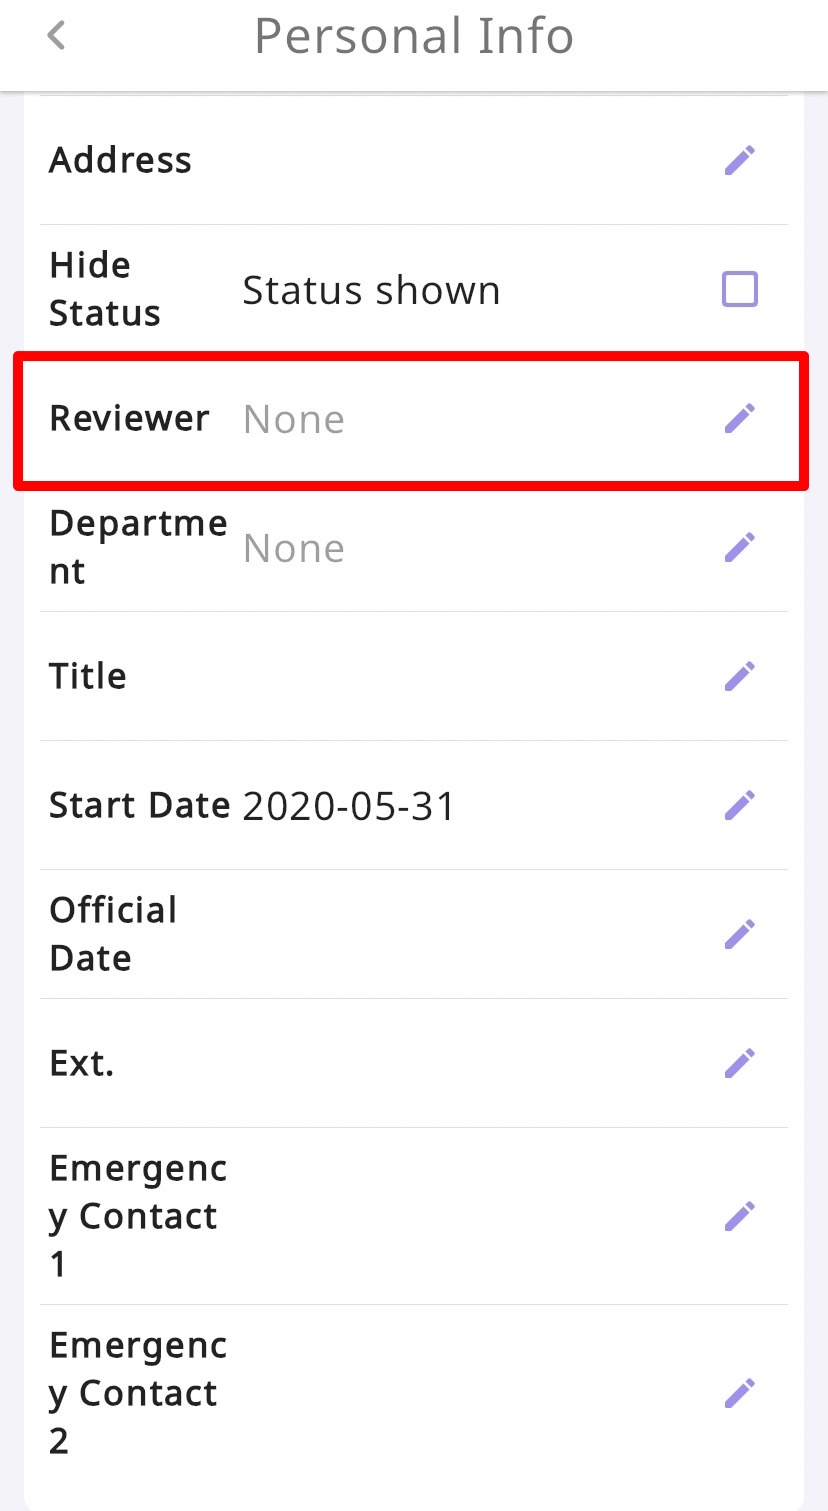 Step3: Please select the reviewer, determining which reviewer will be responsible for reviewing and either approving or rejecting the employee's leave request.